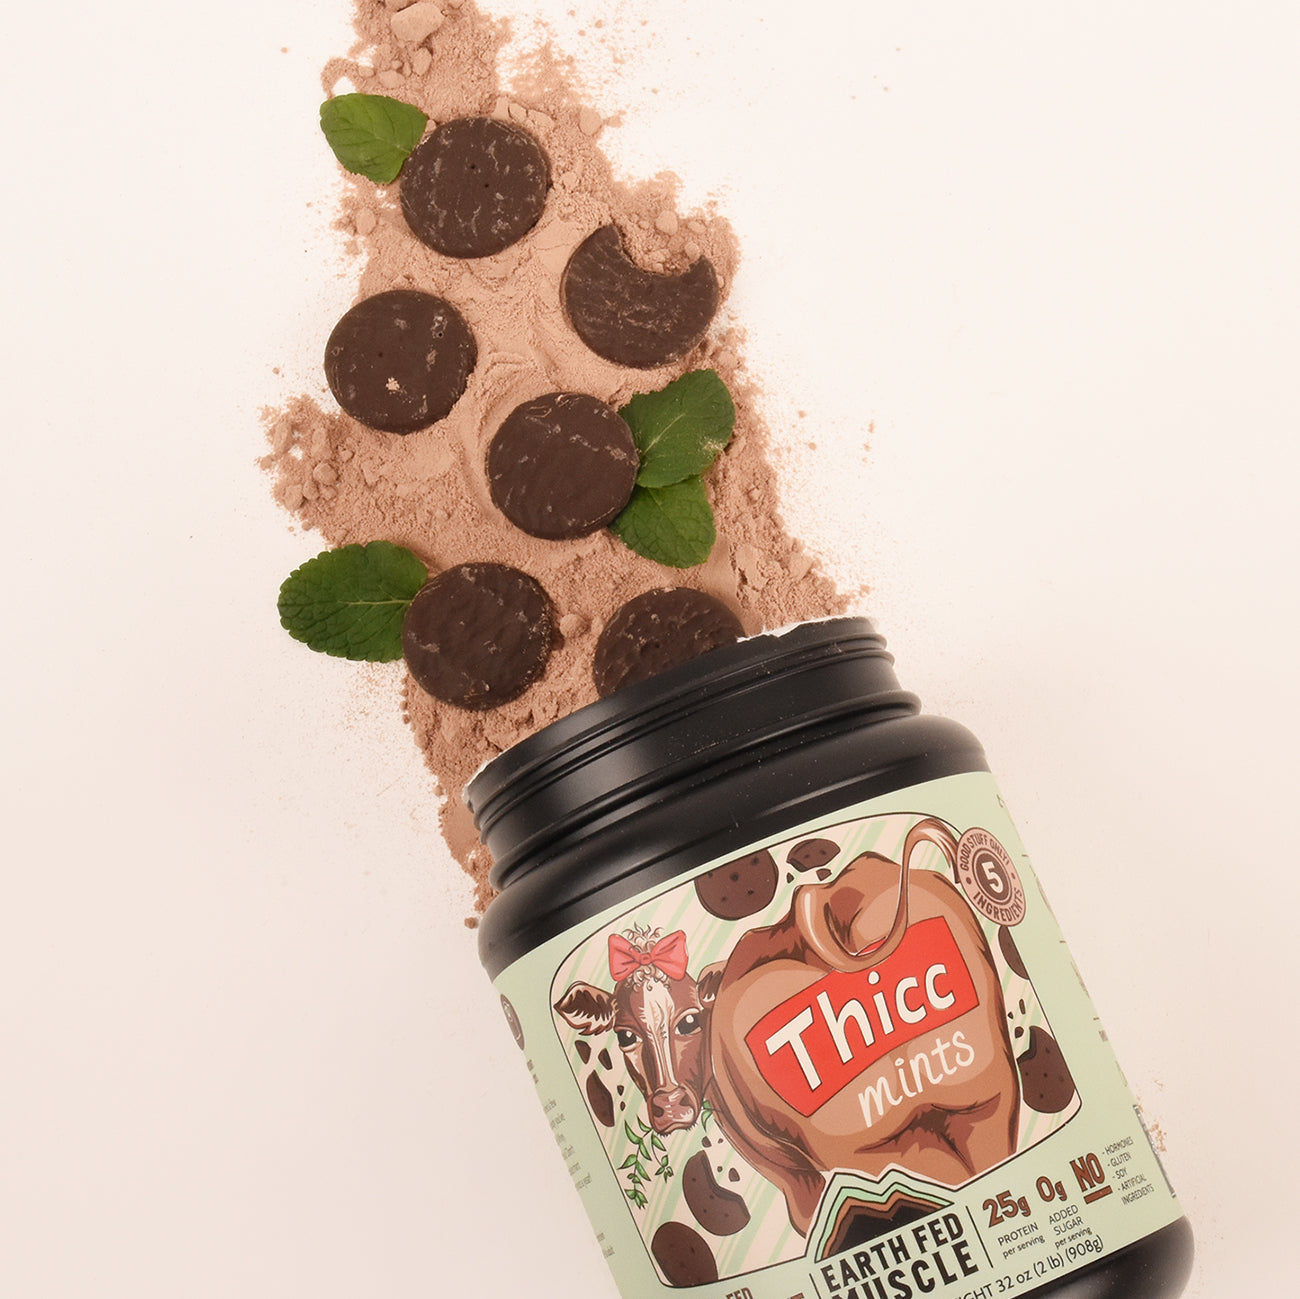 SEASONAL FLAVOR: Thicc Mints Chocolate Mint Grass Fed Protein